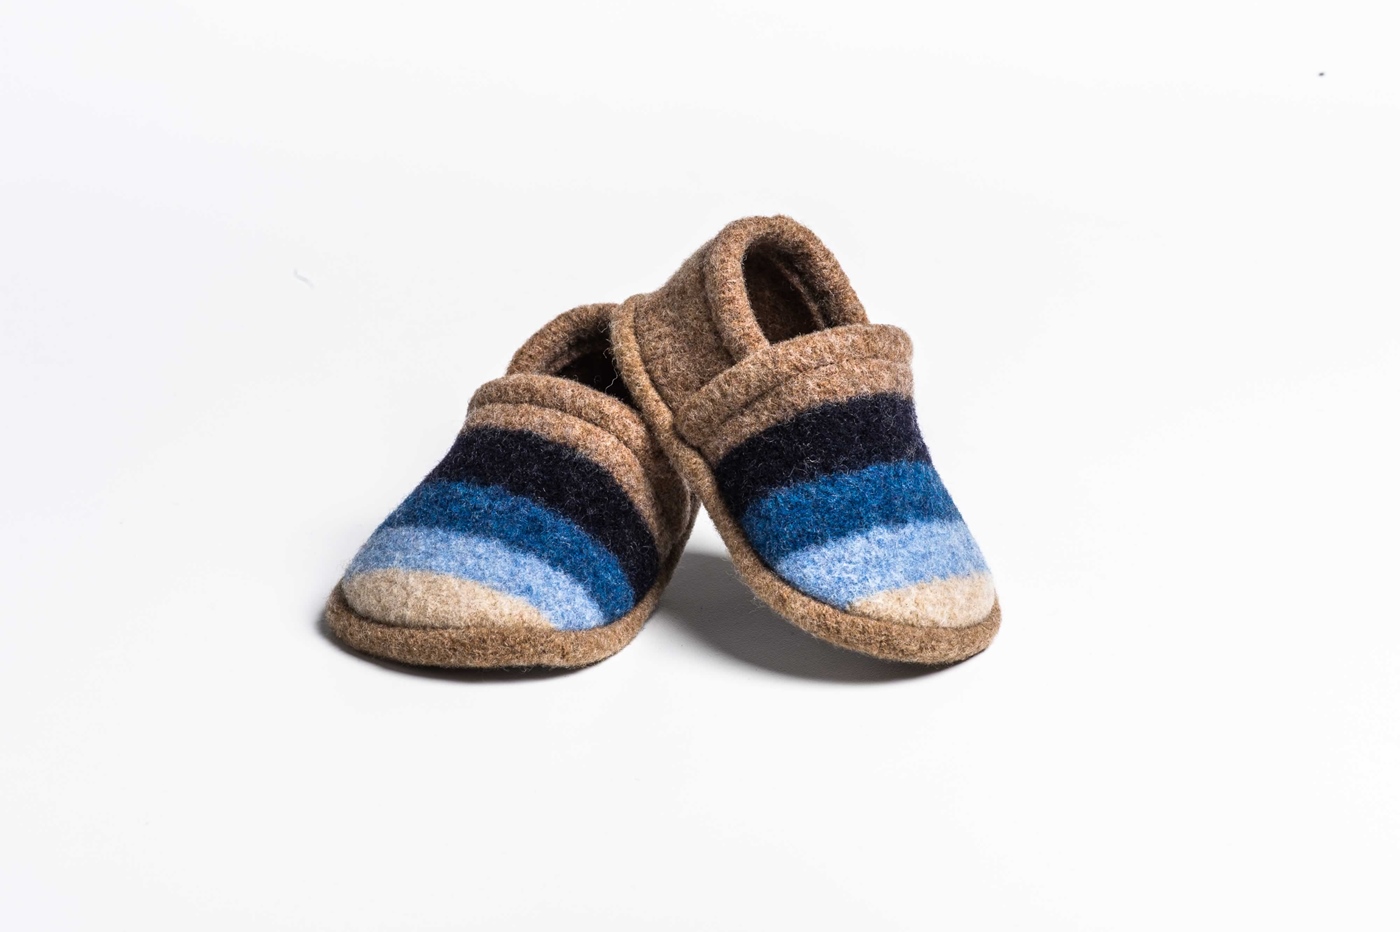 wide baby shoes